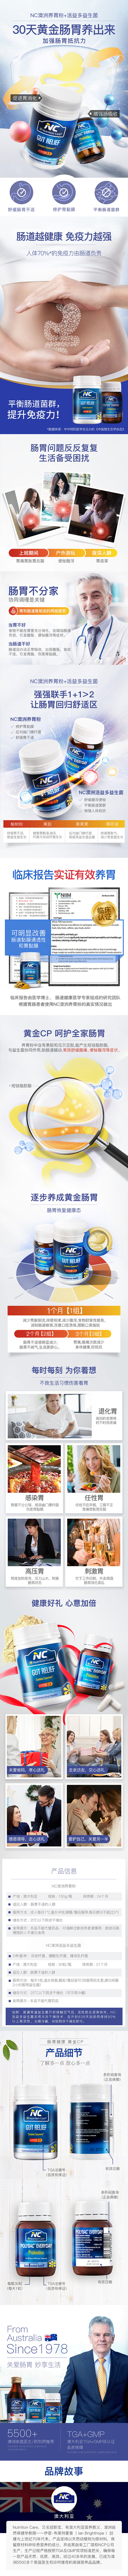 NutritionCareNC澳洲养胃粉...